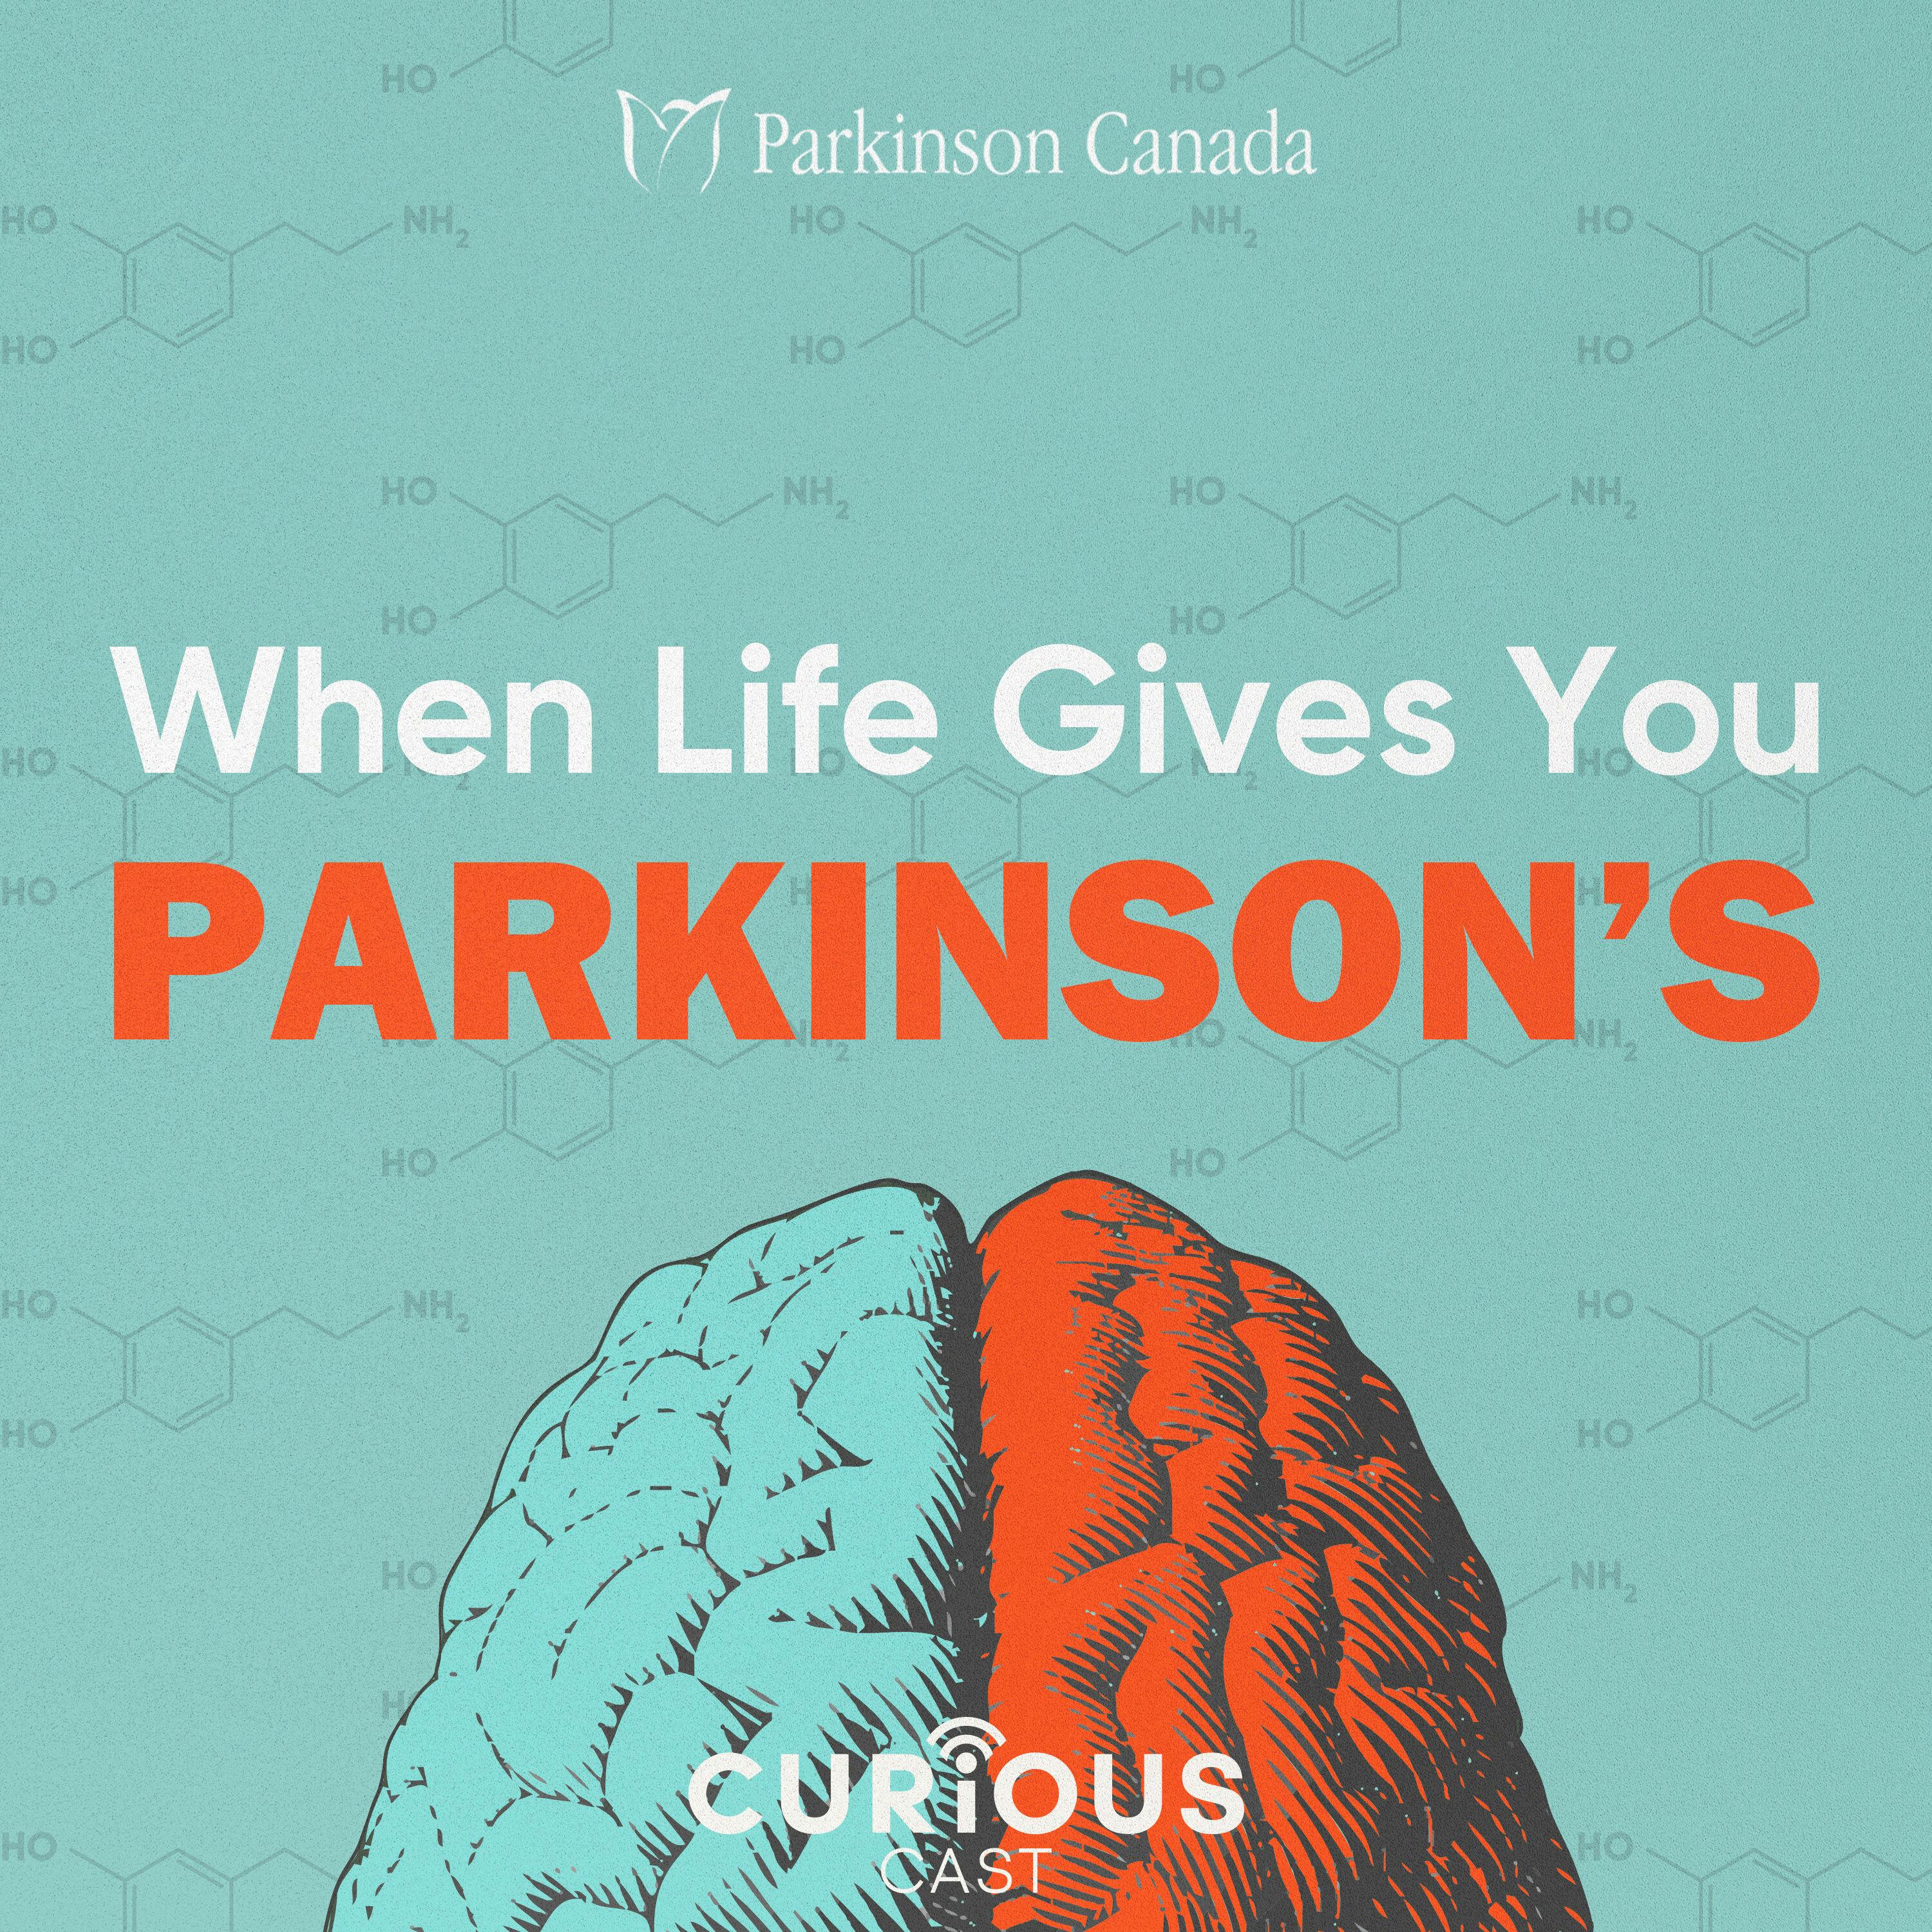 This might be the closest thing to a cure for Parkinson’s